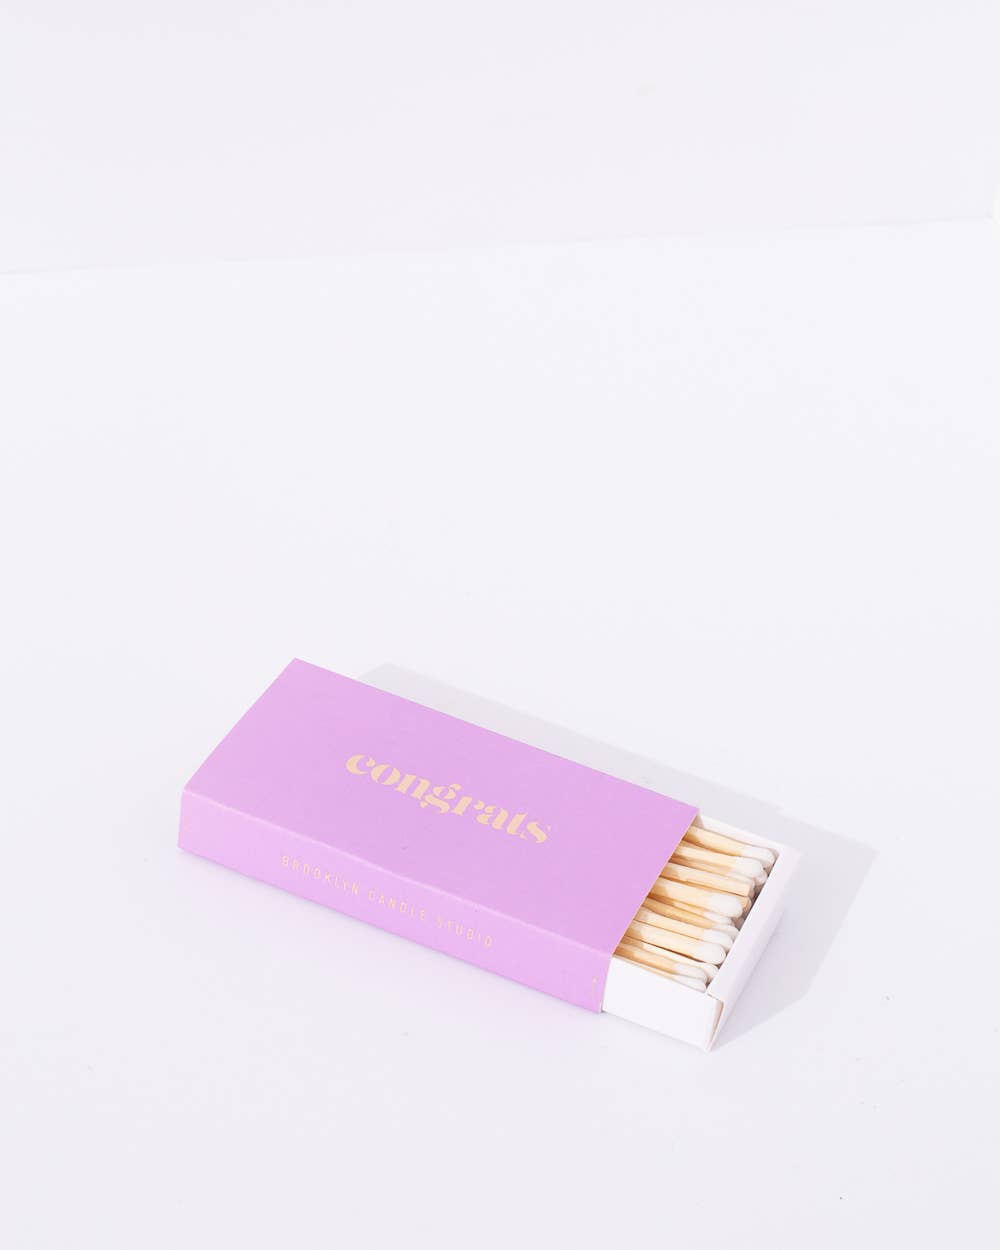 XL Statement matches by Brooklyn Candle Studio - Congrats in Pastel Pink